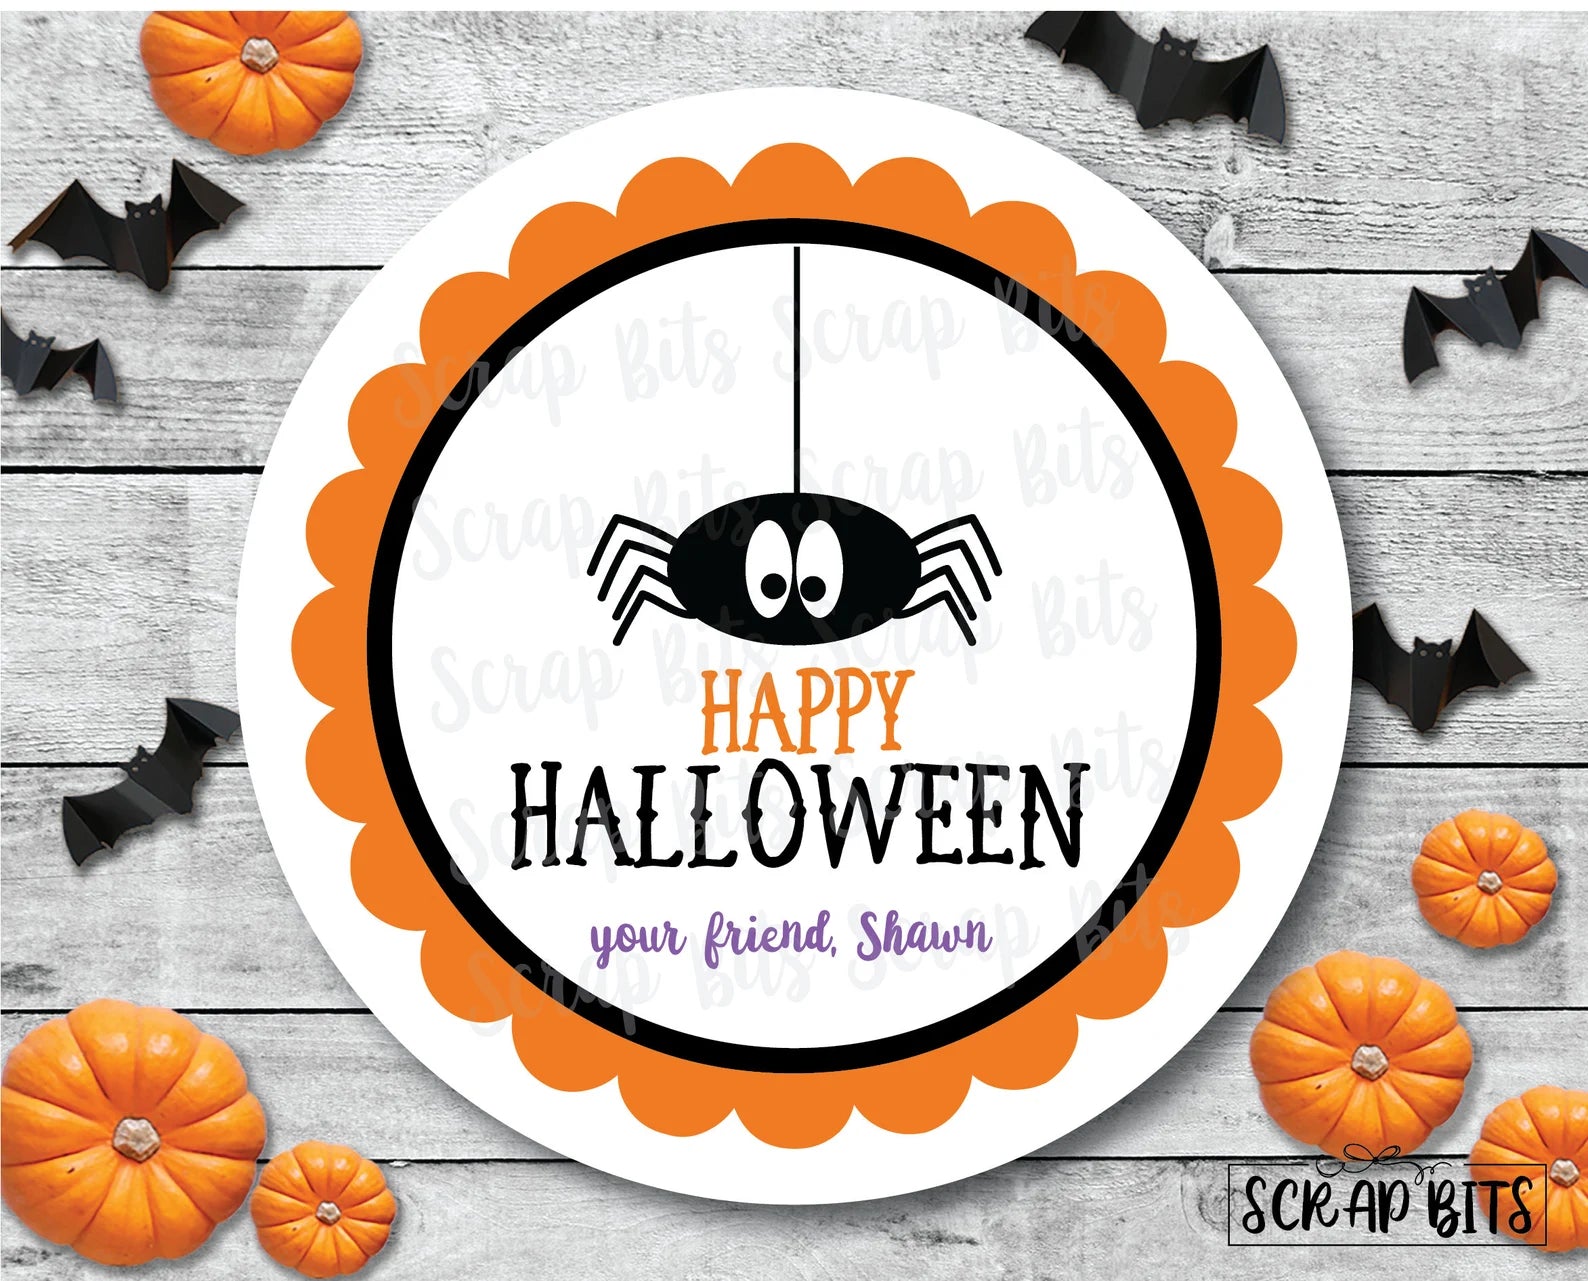 Dangling Spider . Halloween Stickers or Tags - Scrap Bits